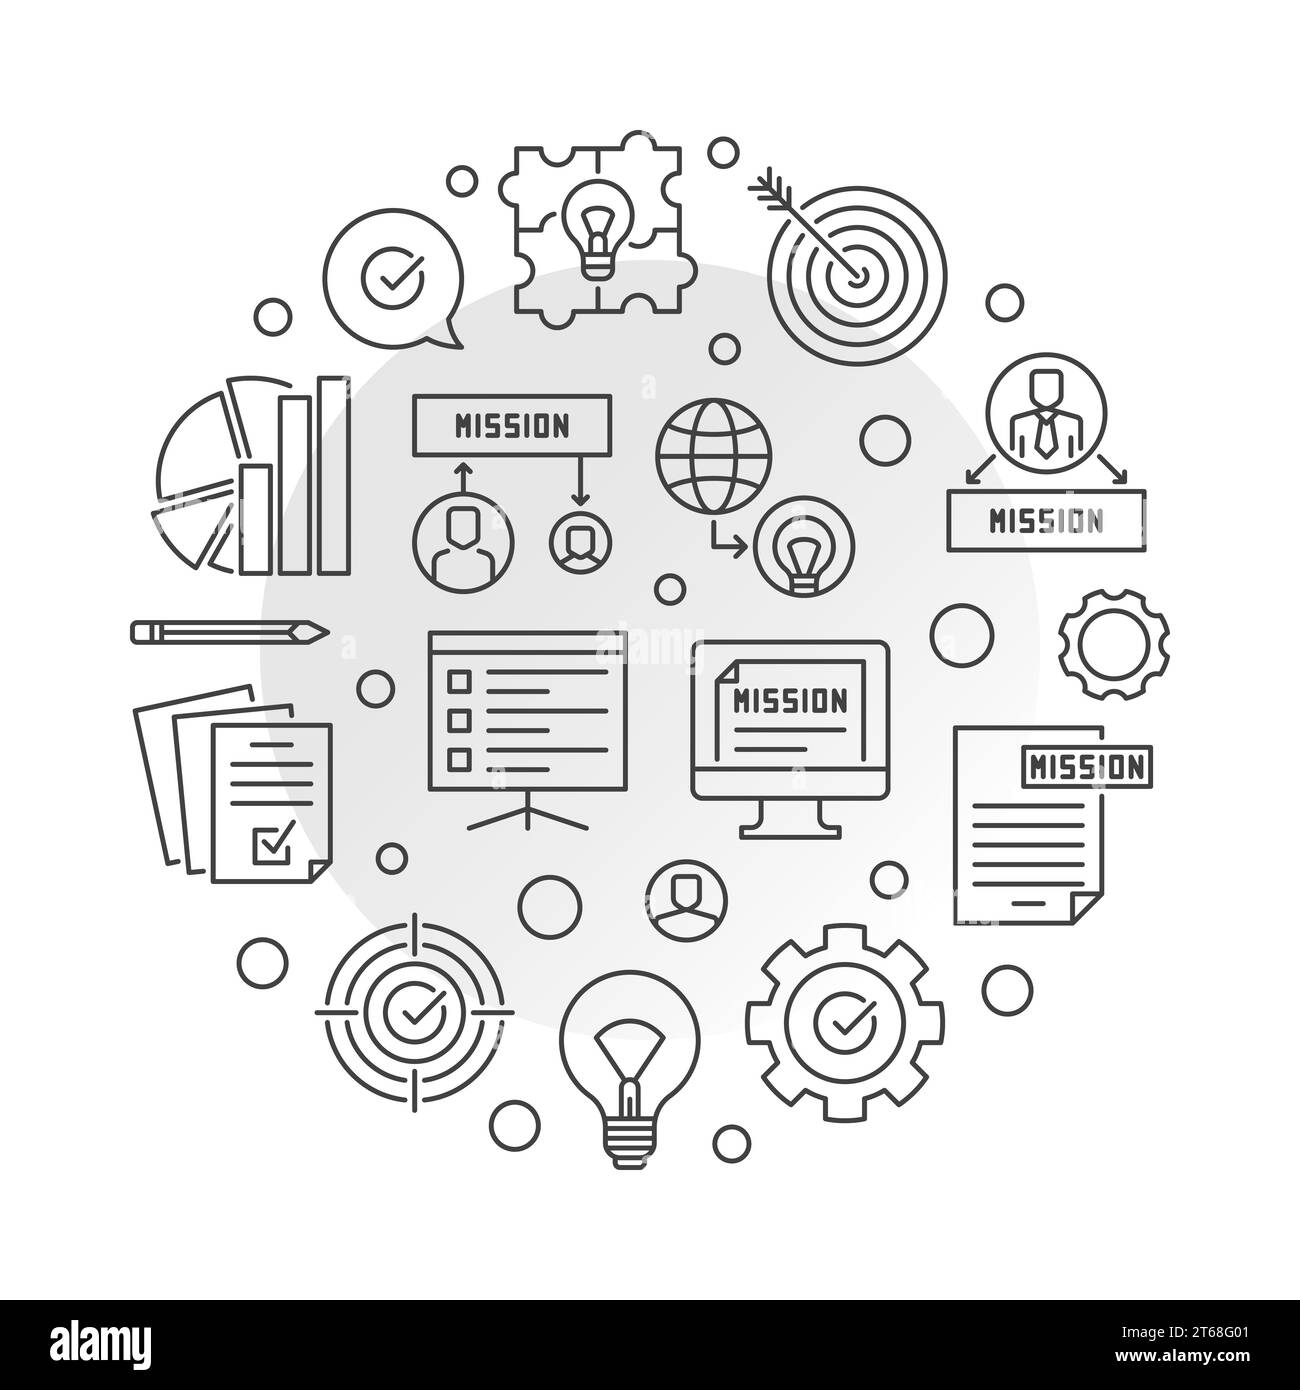 Mission Statements round concept vector illustration in outline style Stock Vector